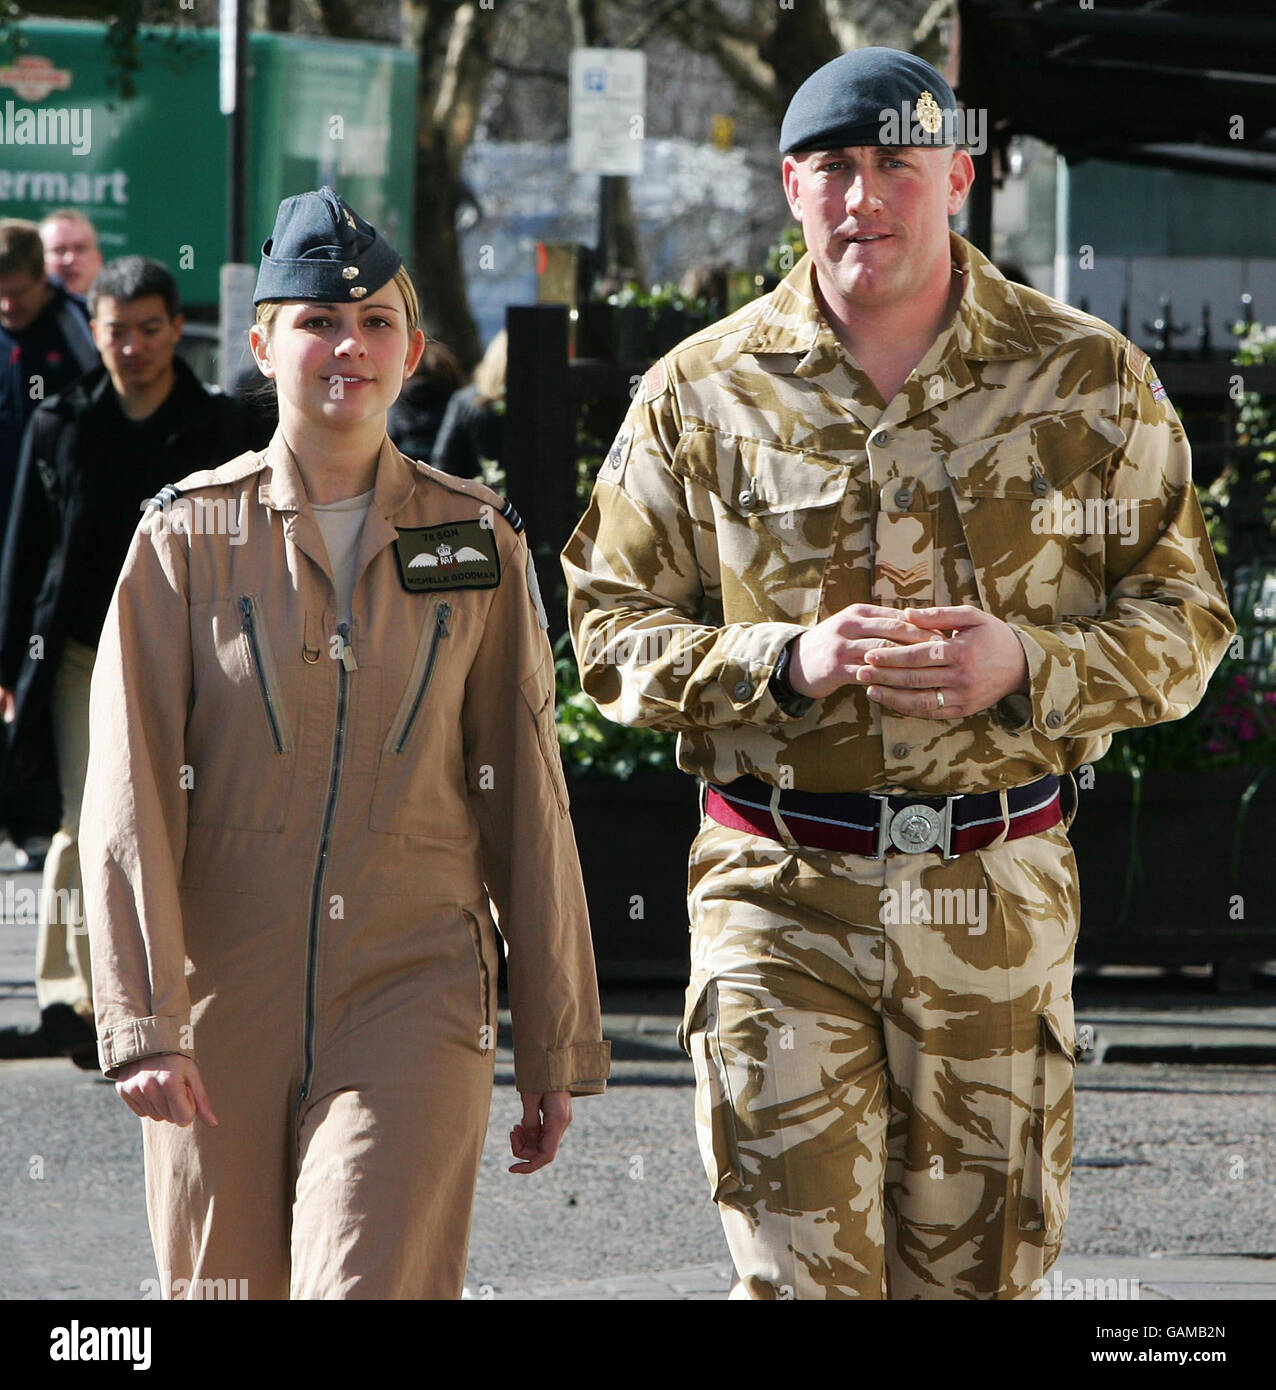 RAF Flight Lieutenant Michelle Goodman and Corporal David Hayden arrive at the RAF Club, in London, before receiving awards for bravery in Iraq. Stock Photo